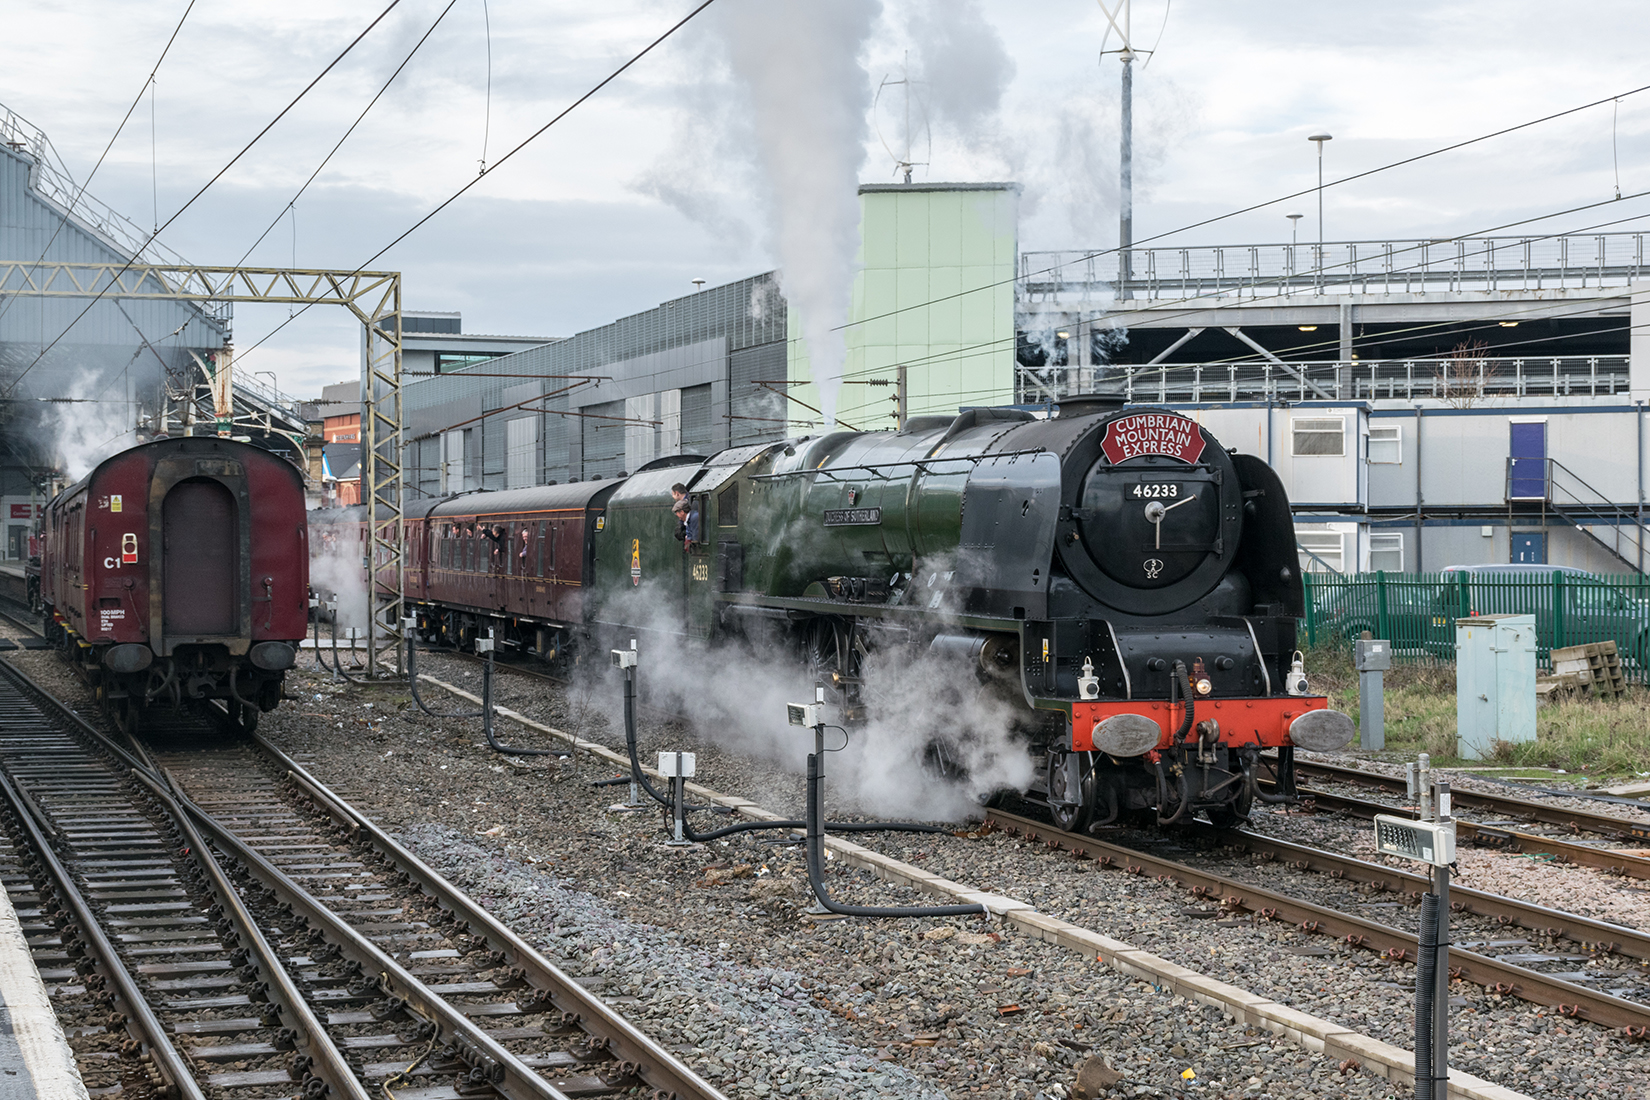 'Duchess of Sutherland' at Preston station is passed by Jubilee 'Galatea'